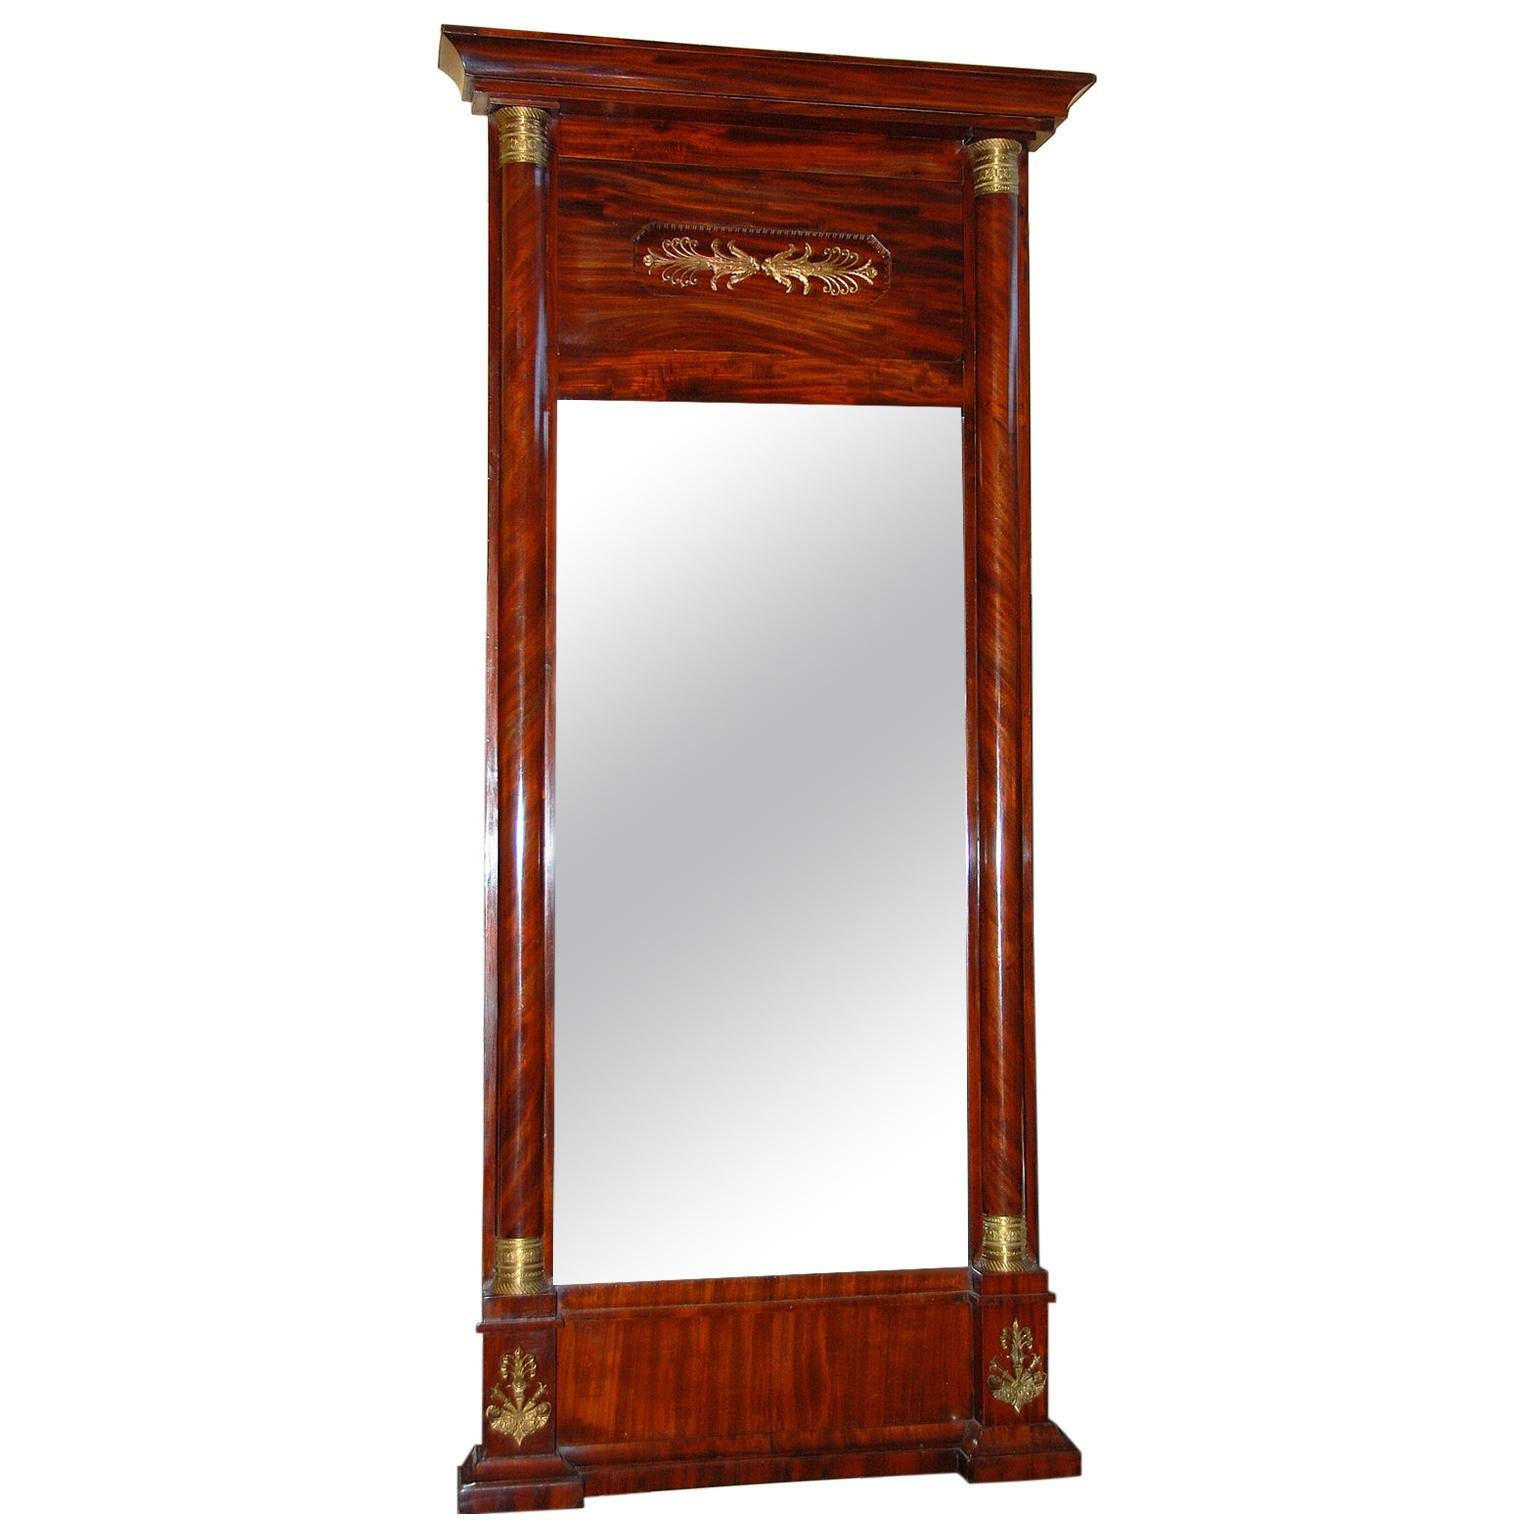 French Empire Period Mahogany Tall Mirror with Ormolu Mounts and Side Columns 